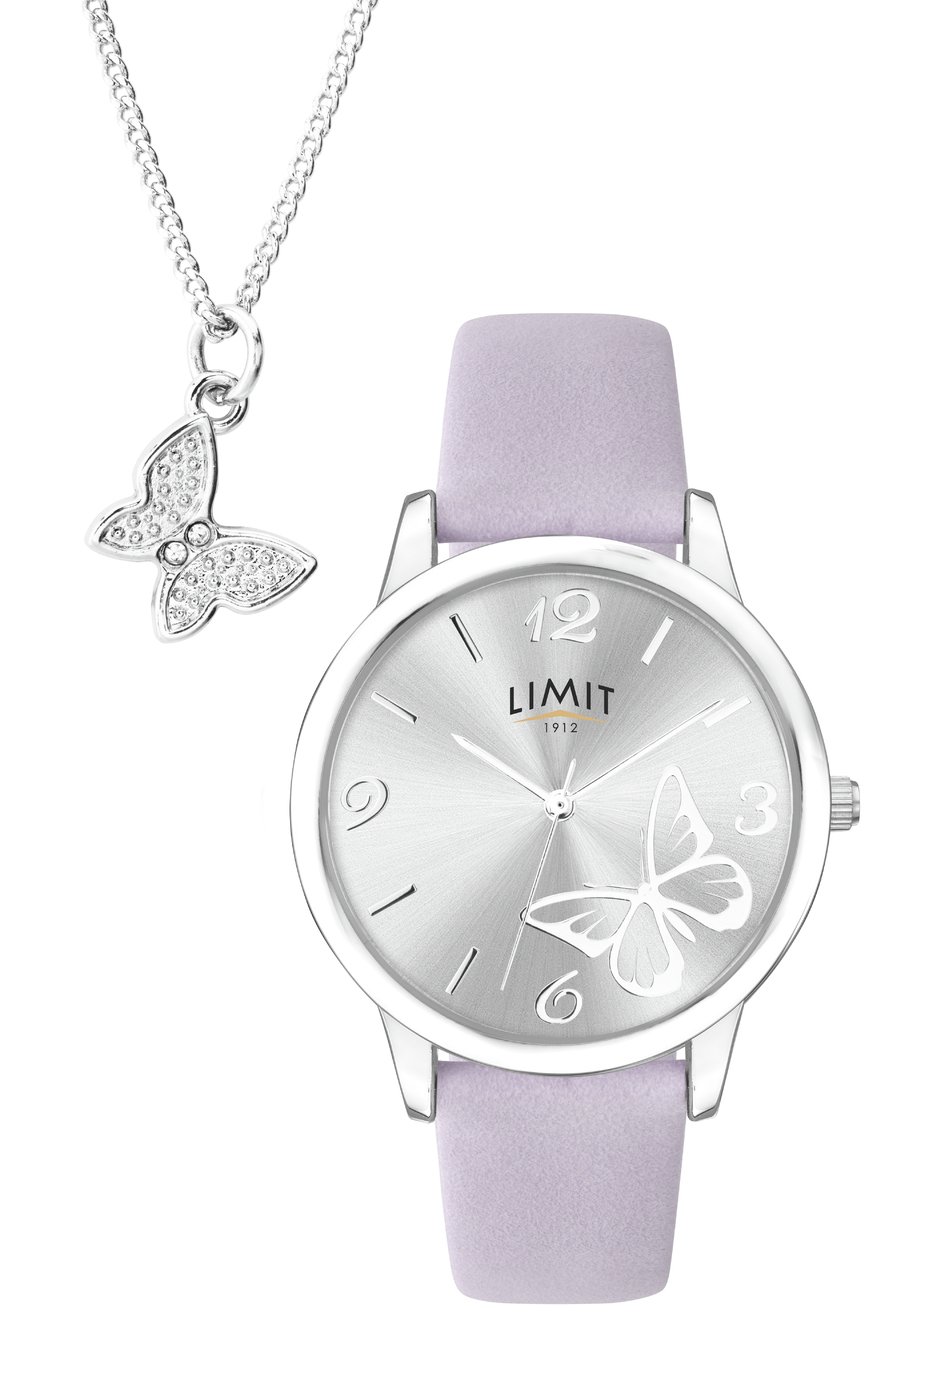 Limit Silver Ladies Watch and Pendant Set